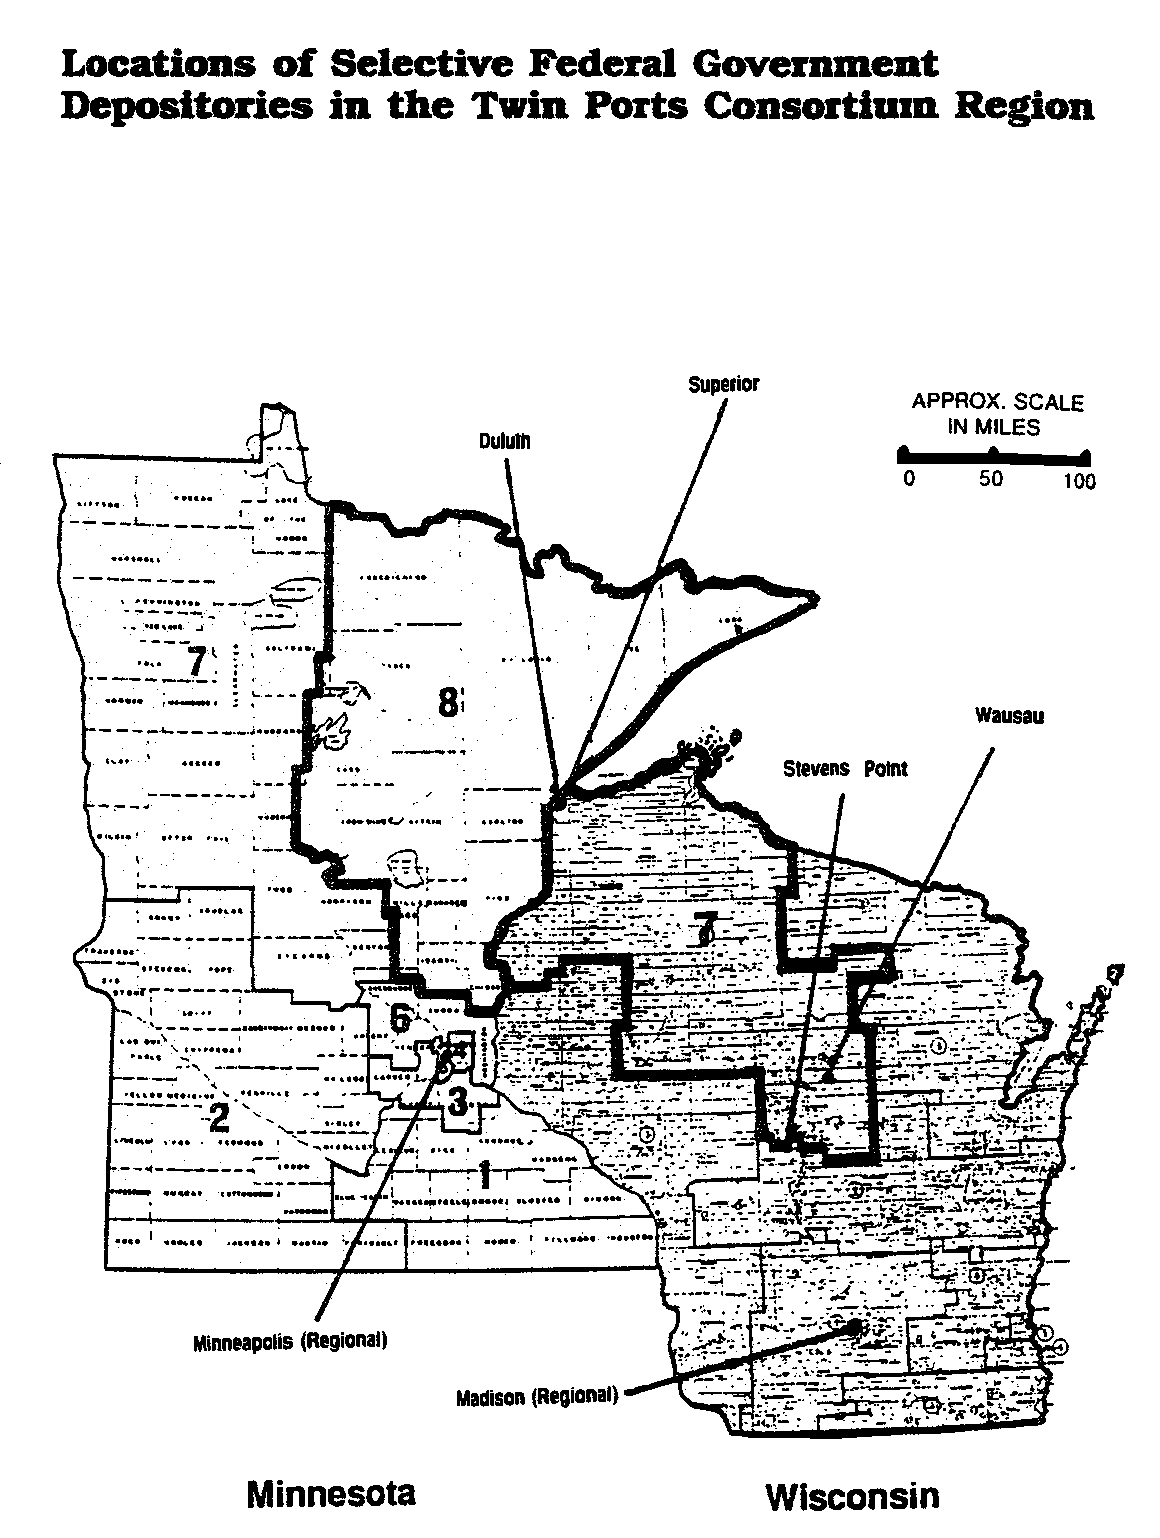 Location of Federal Selective Depositories in the Twin Ports Government Documents Depository Consortium